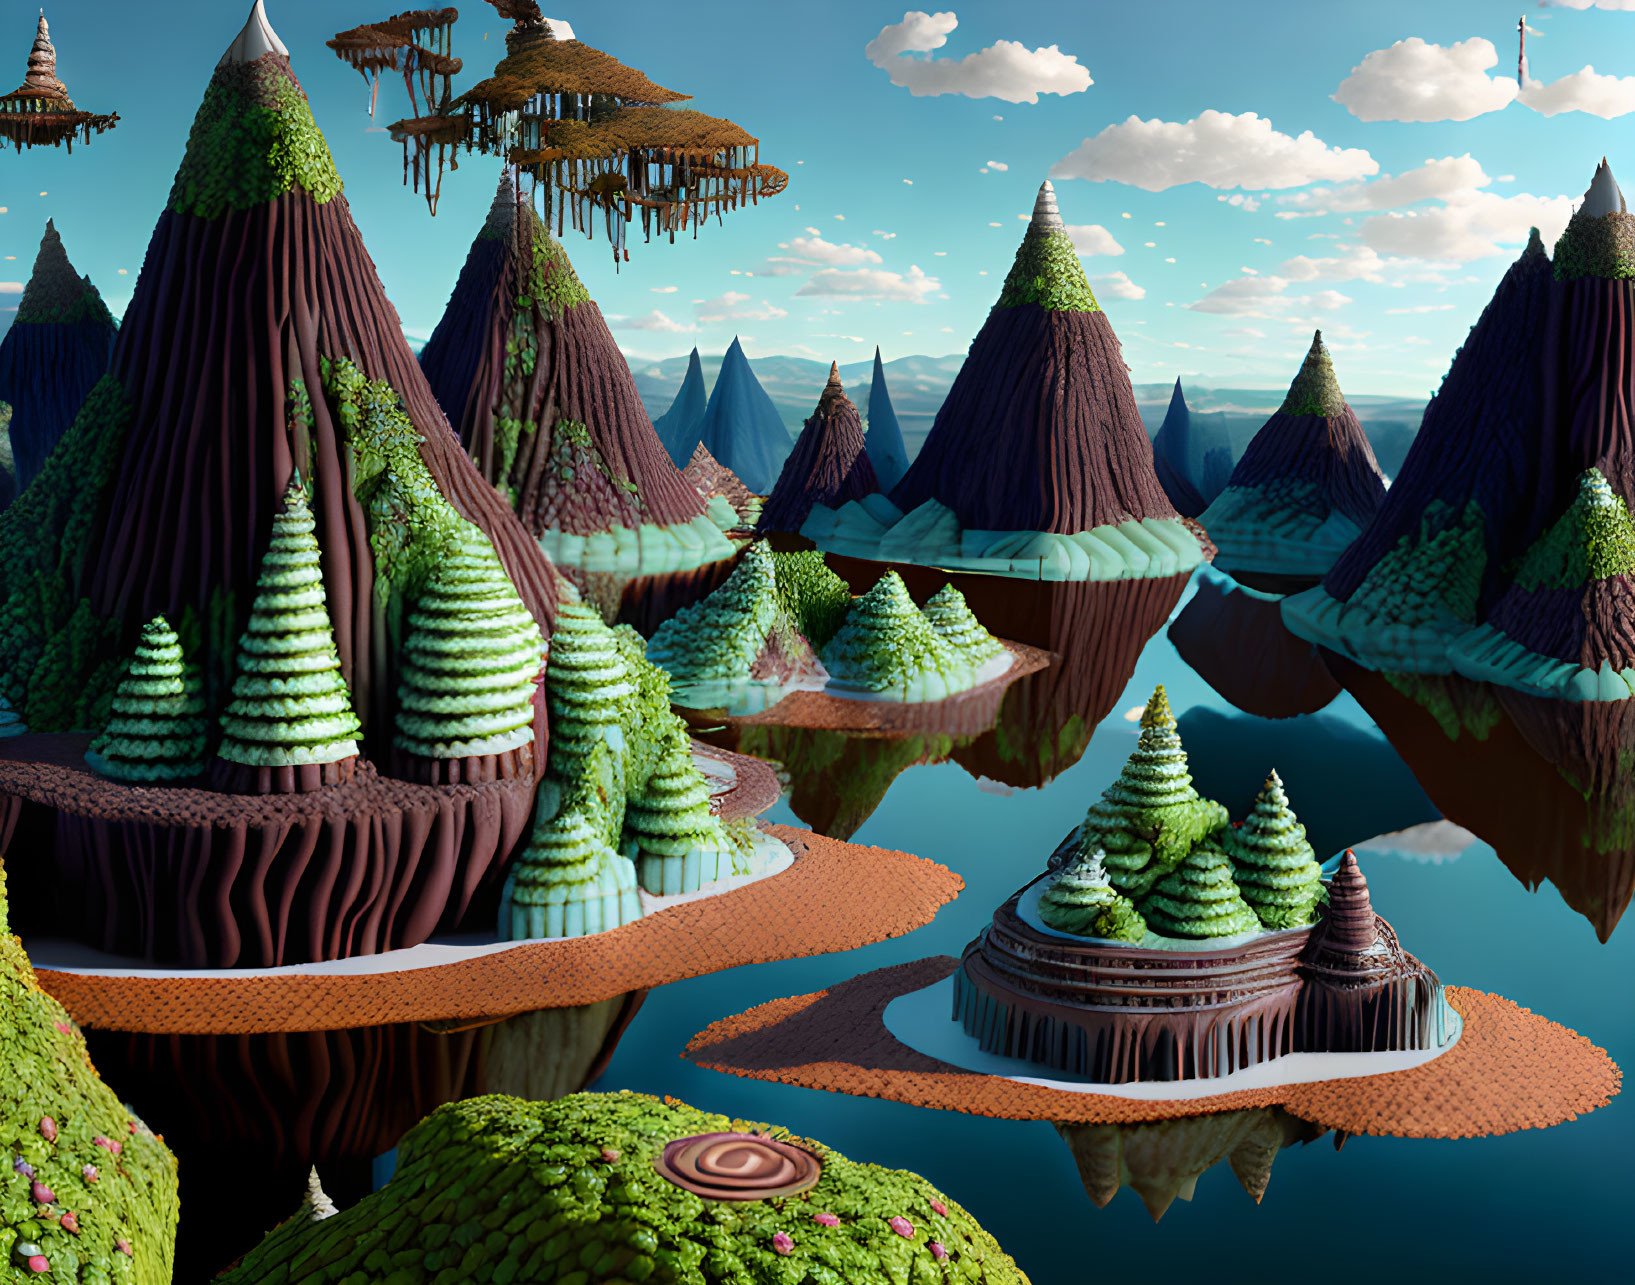 Fantastical landscape with conical mountains, reflective water, lush trees, and floating islands above tranquil